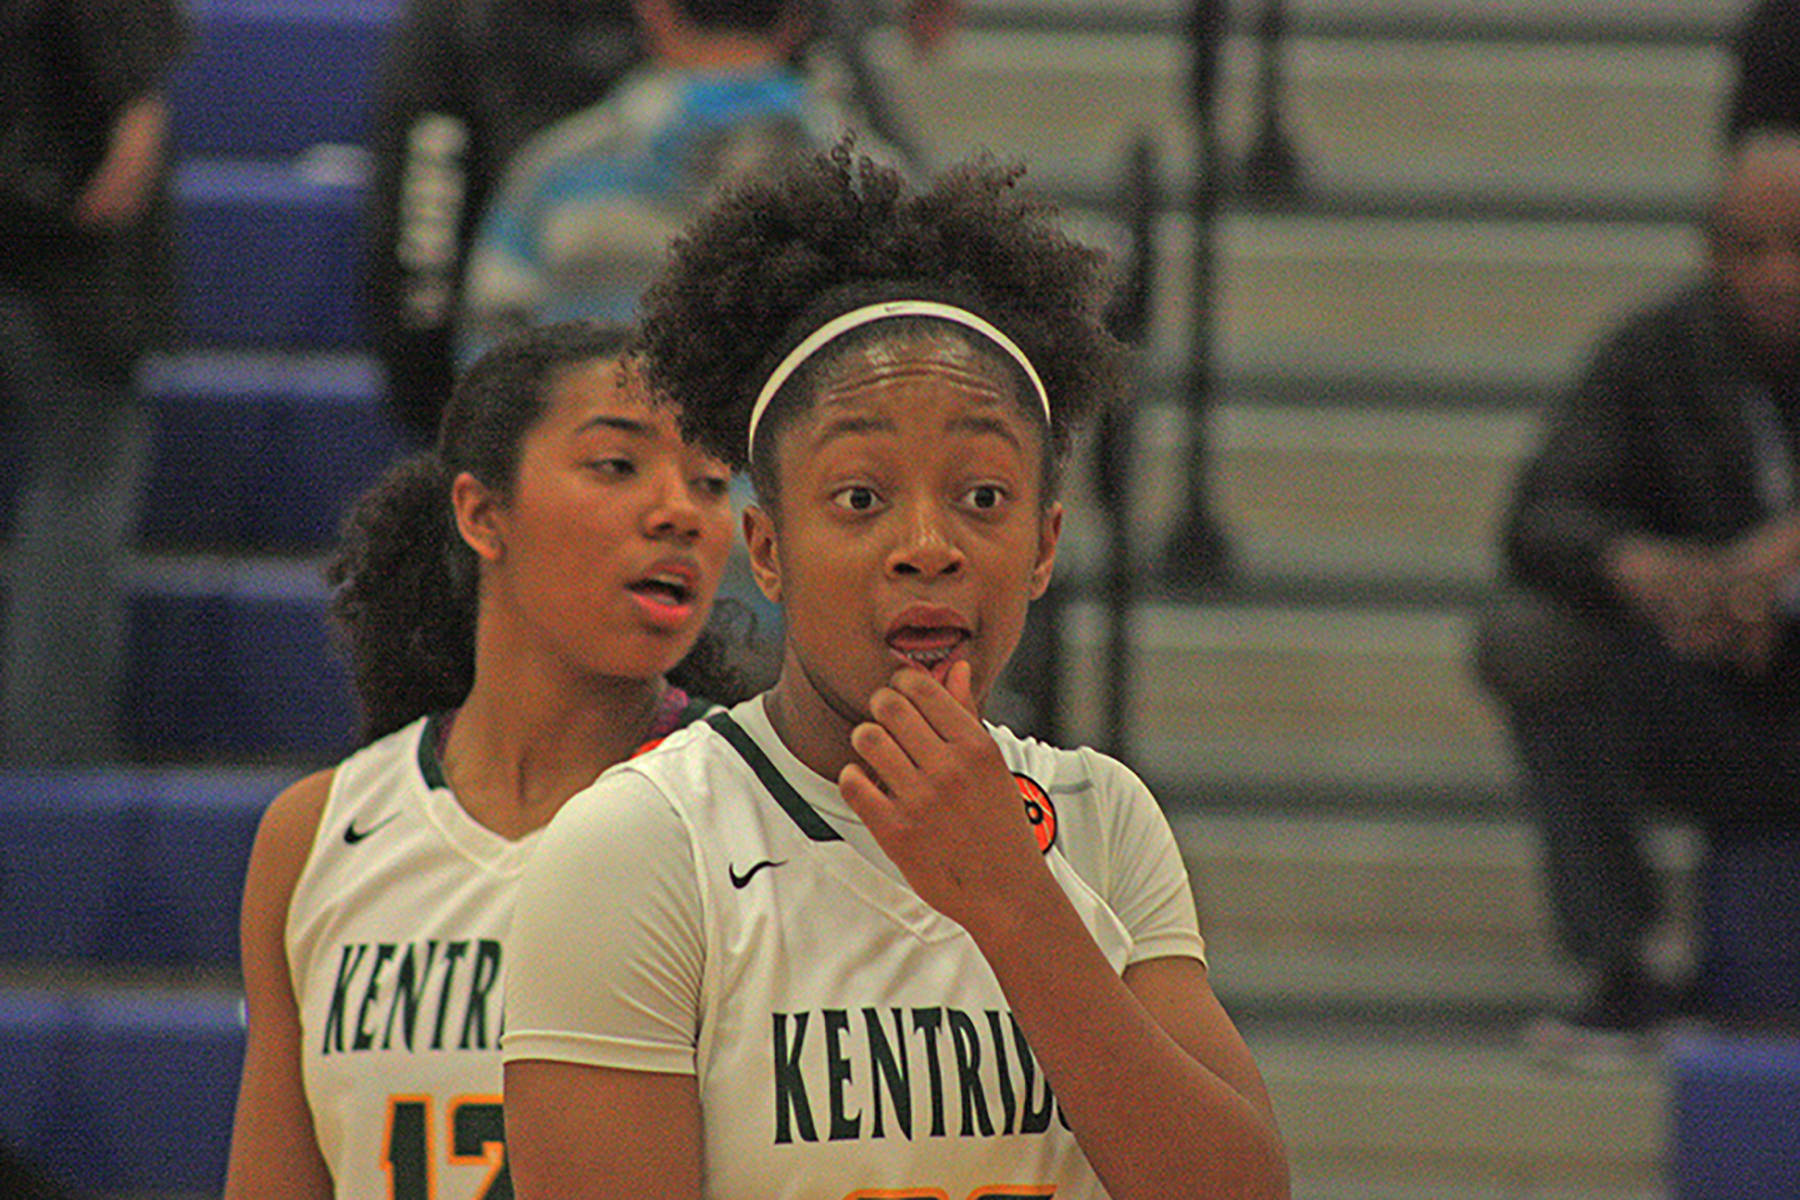 Kentridge sophomore Dayla Ballena, right, looks to the bench for instruction during a 4A regional basketball playoff against Bellarmine Prep on Saturday. Ballena scored a career-high 19 points and her backcourt teammate, senior Tresai McCarver, left, had nine points in the win. MARK KLAAS, Kent Reporter